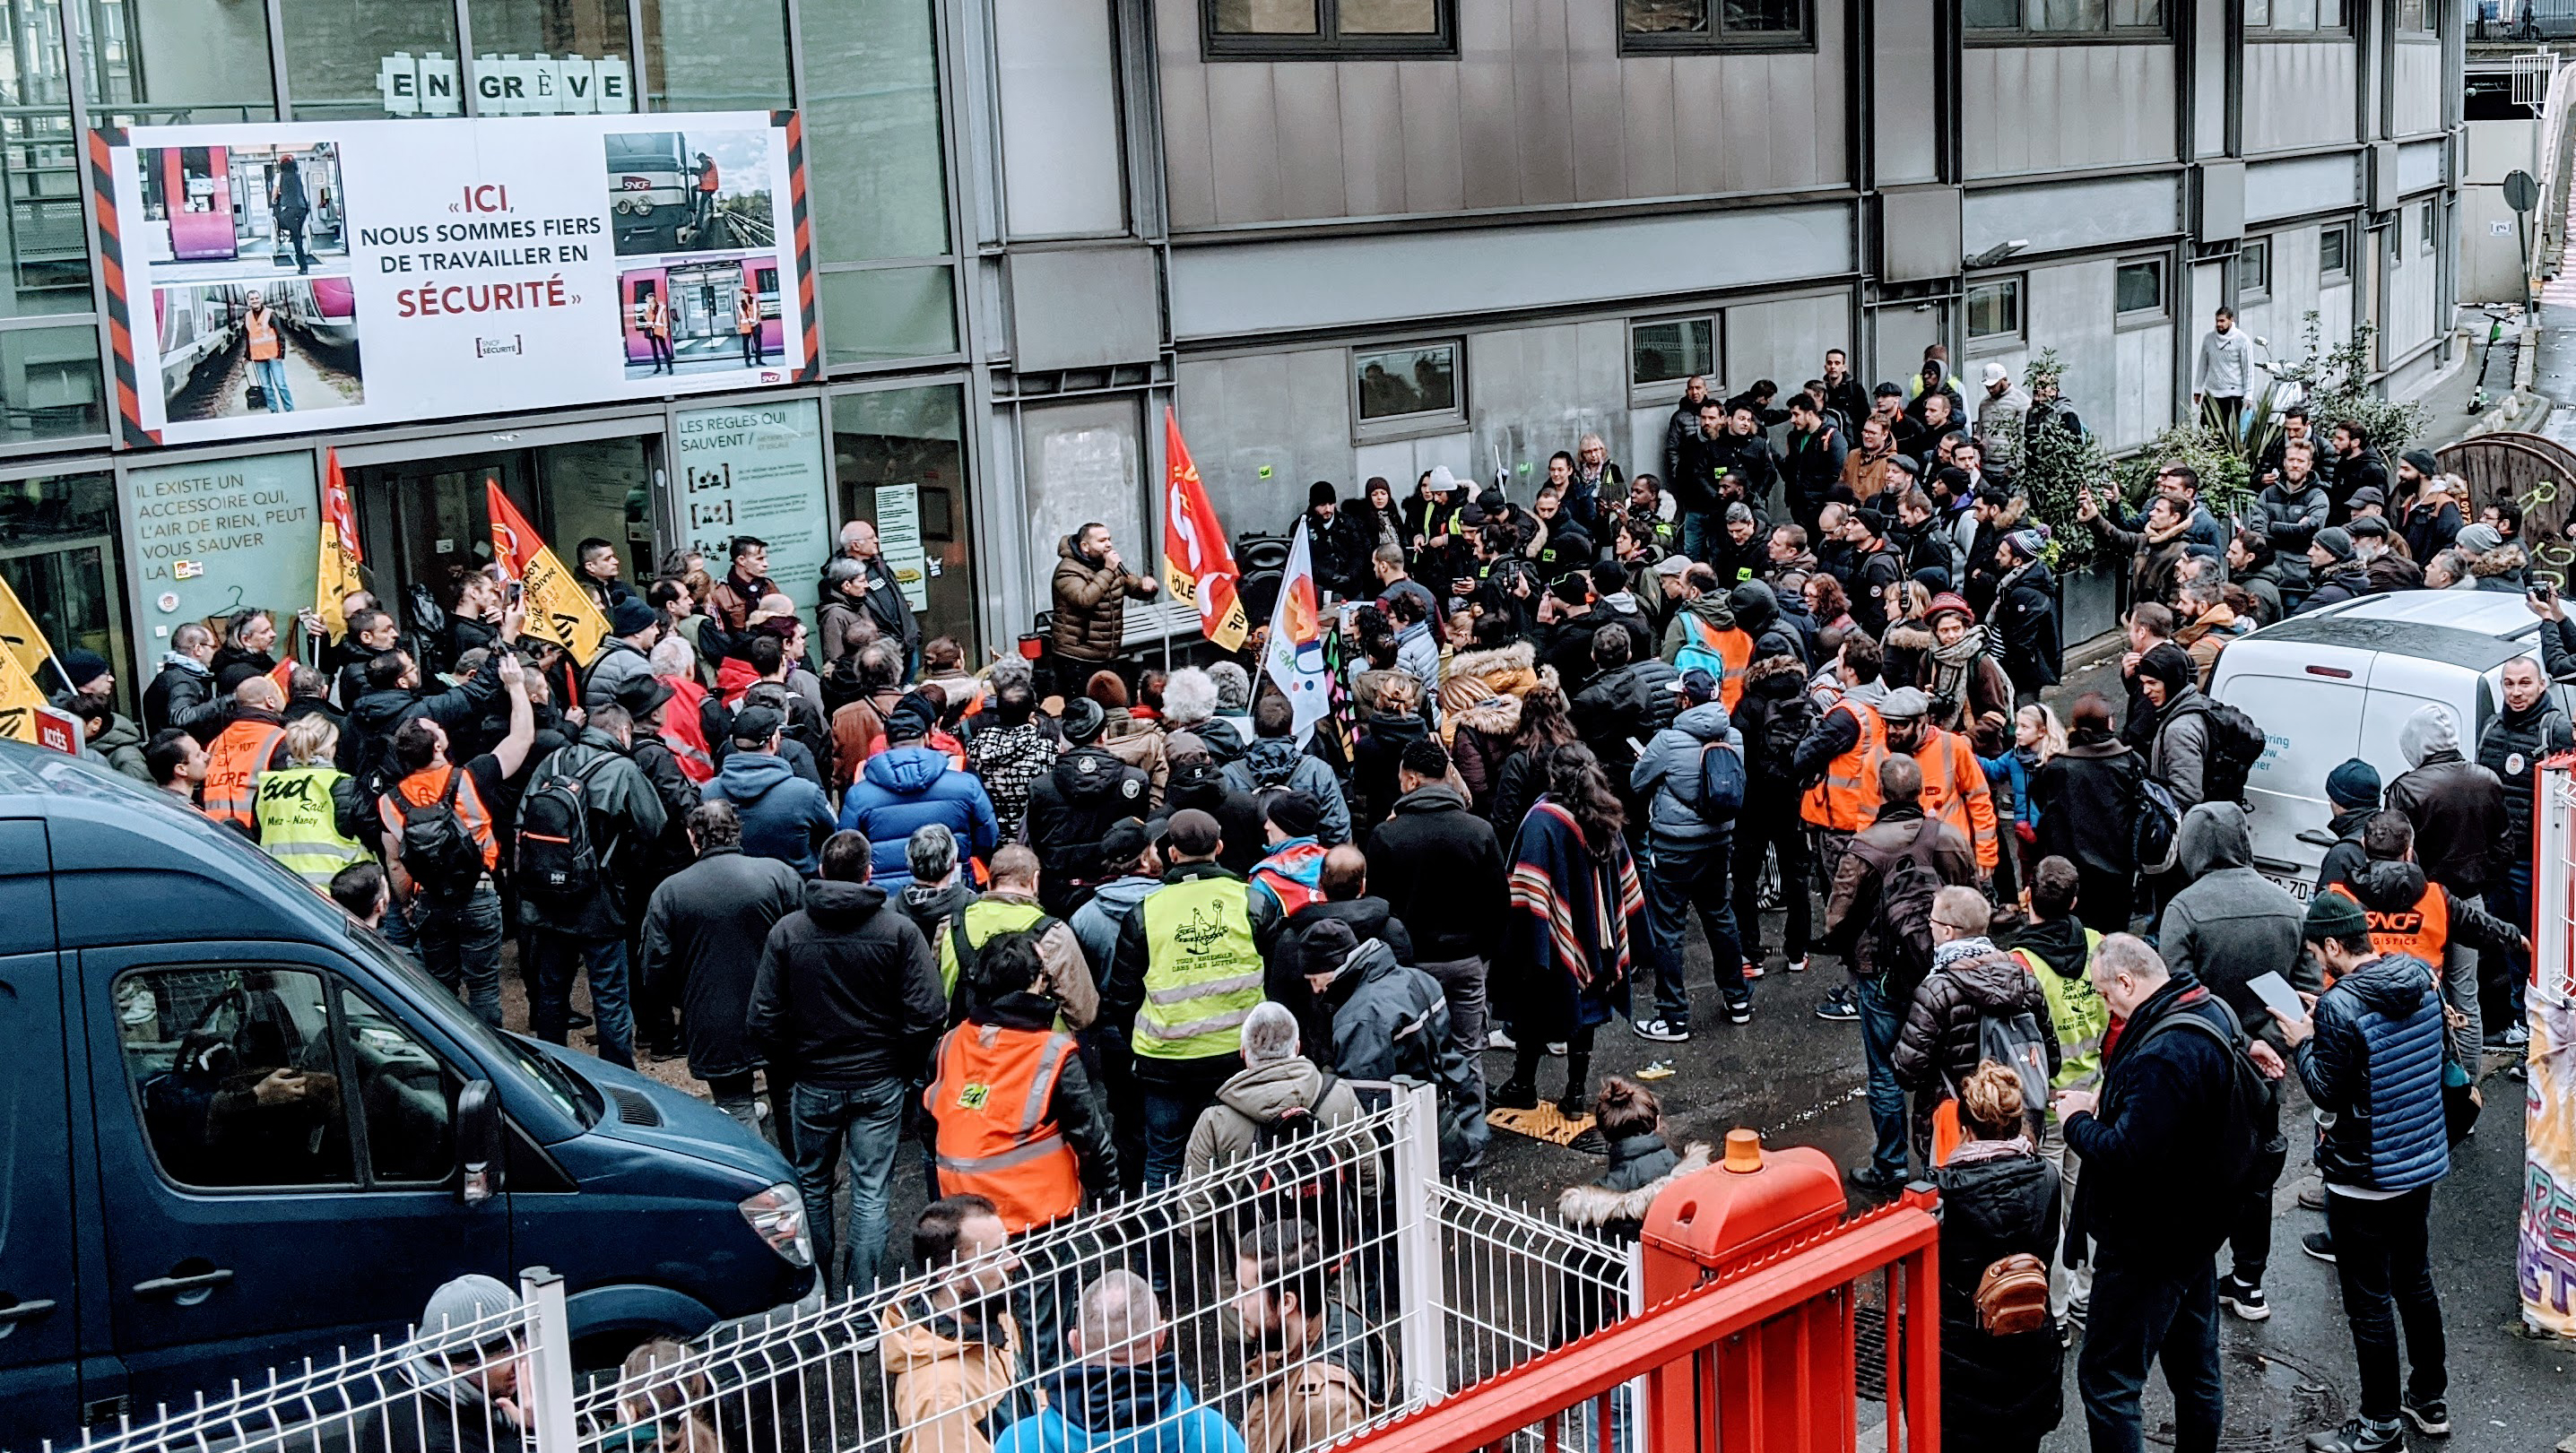 A meeting of striking railworkers at Gare du Nord, Paris, January 9.